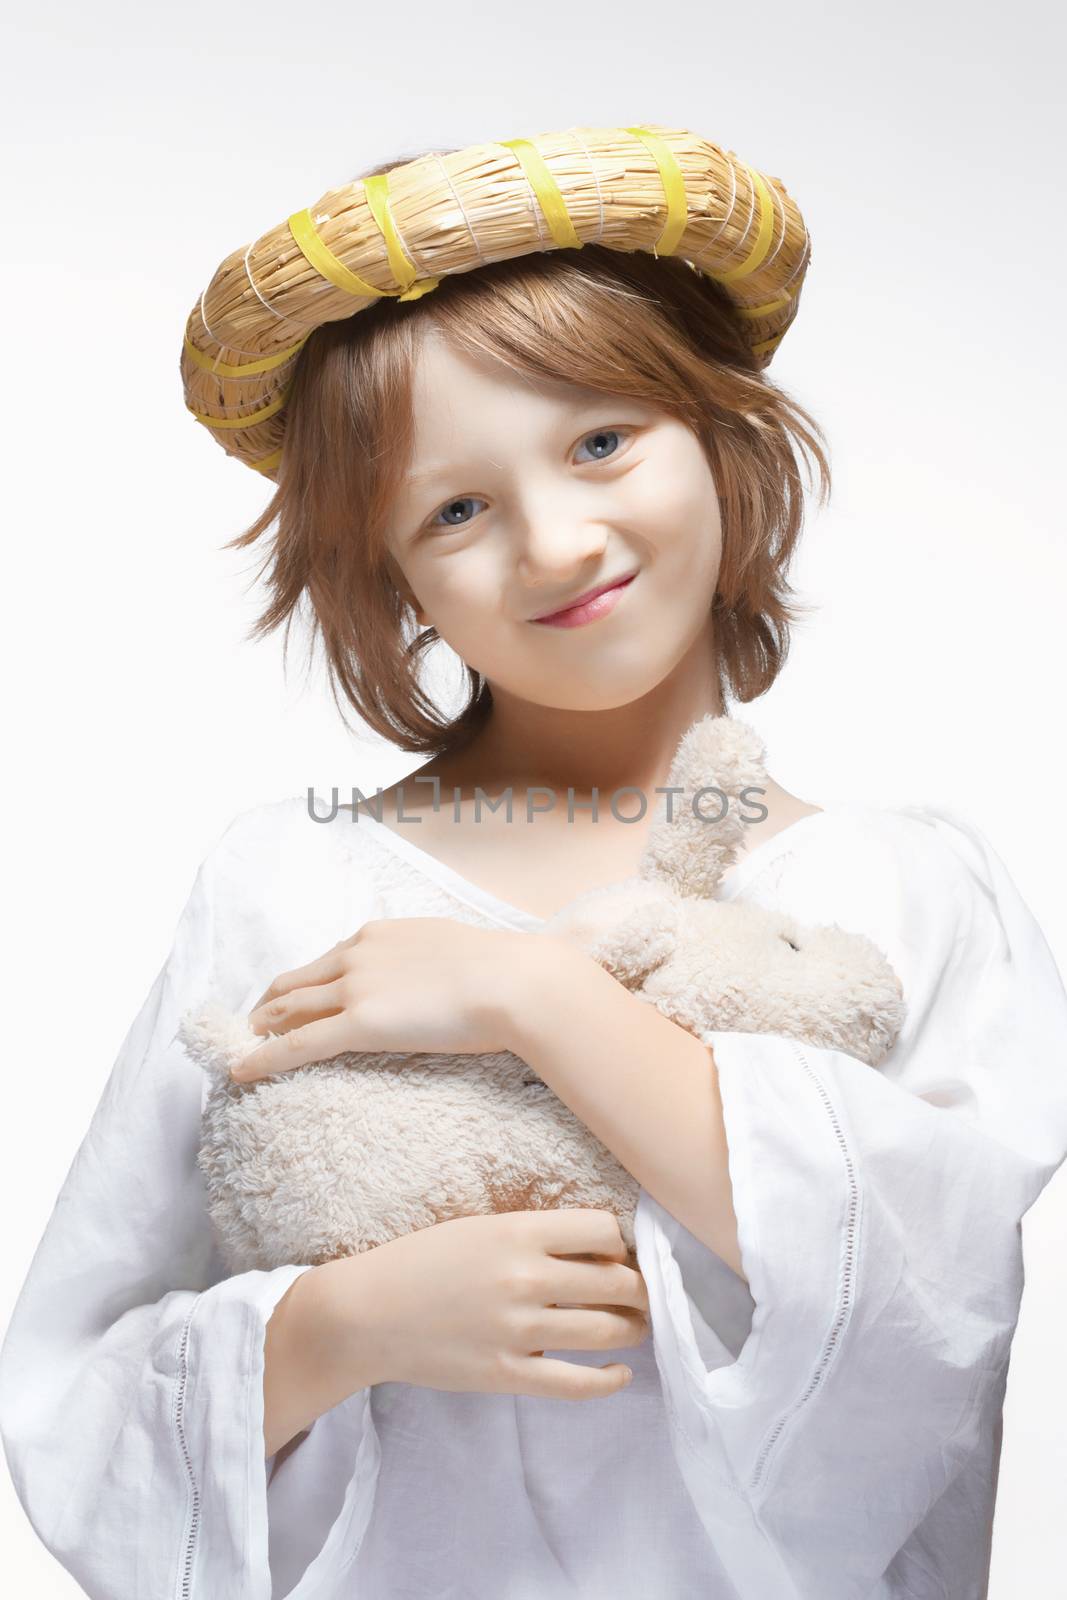 Portrait of a Boy with Wreath and Stuffed Animal by courtyardpix